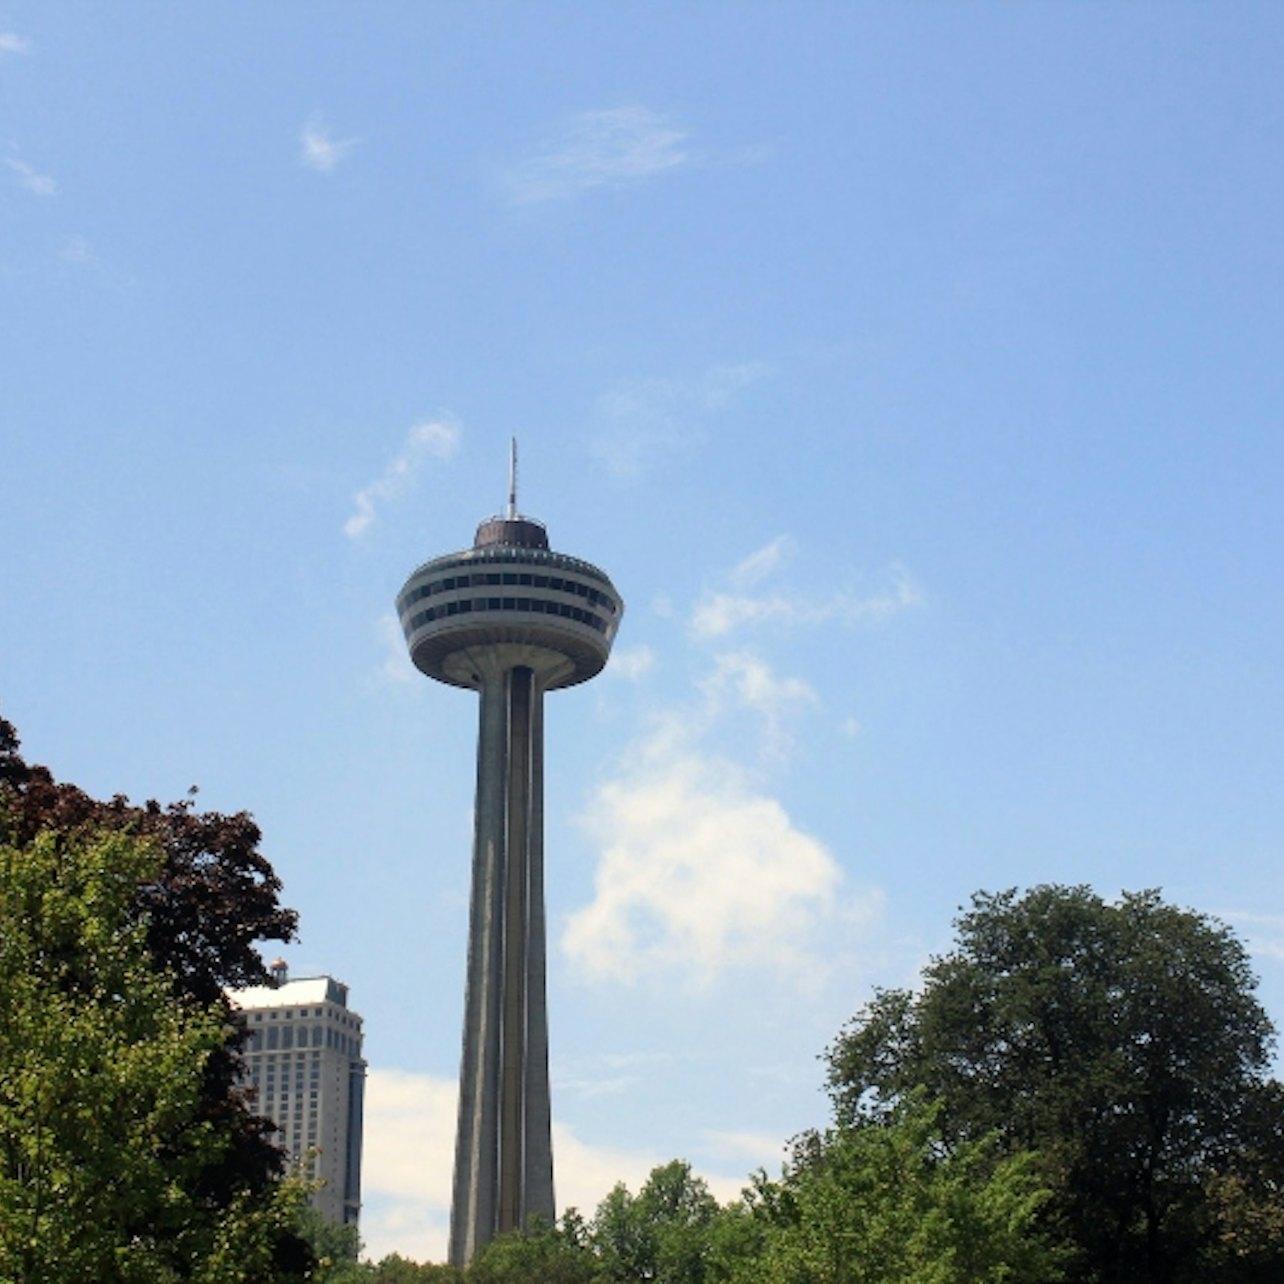 Canadian Falls Tour with Boat Cruise & Skylon Tower - Accommodations in Niagara Falls